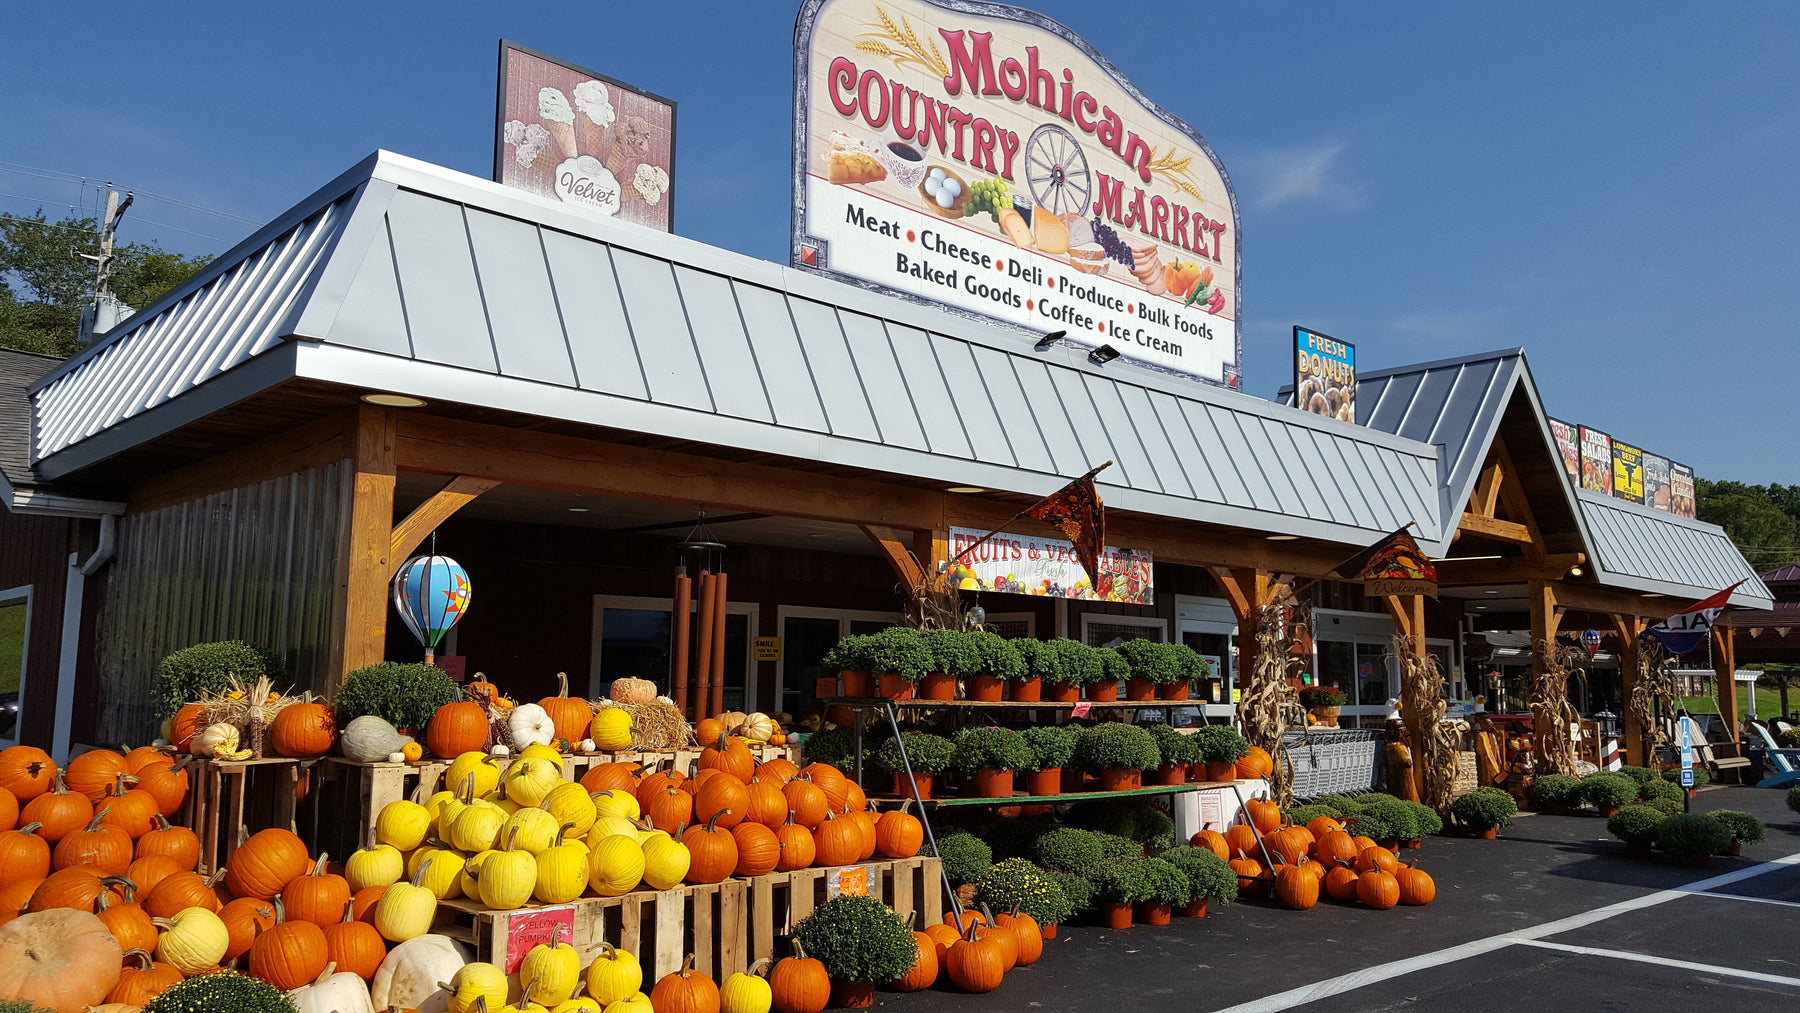 Delight in Deli: Discover the Variety at Mohican Market and Café